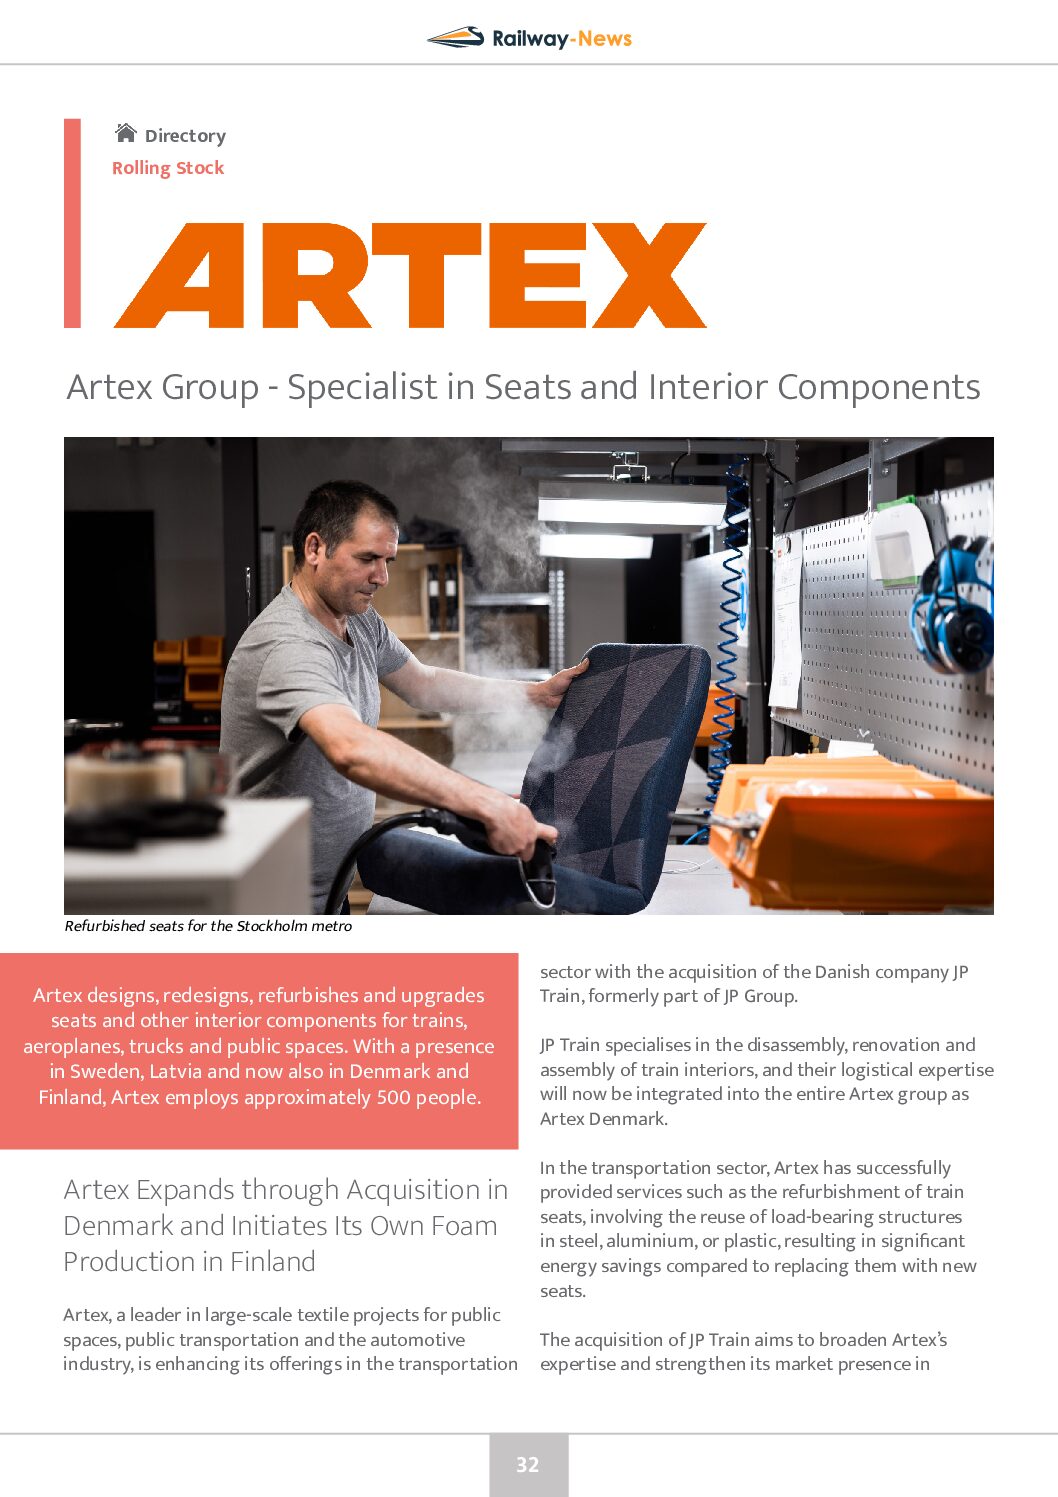 Artex Group – Specialist in Seats and Interior Components